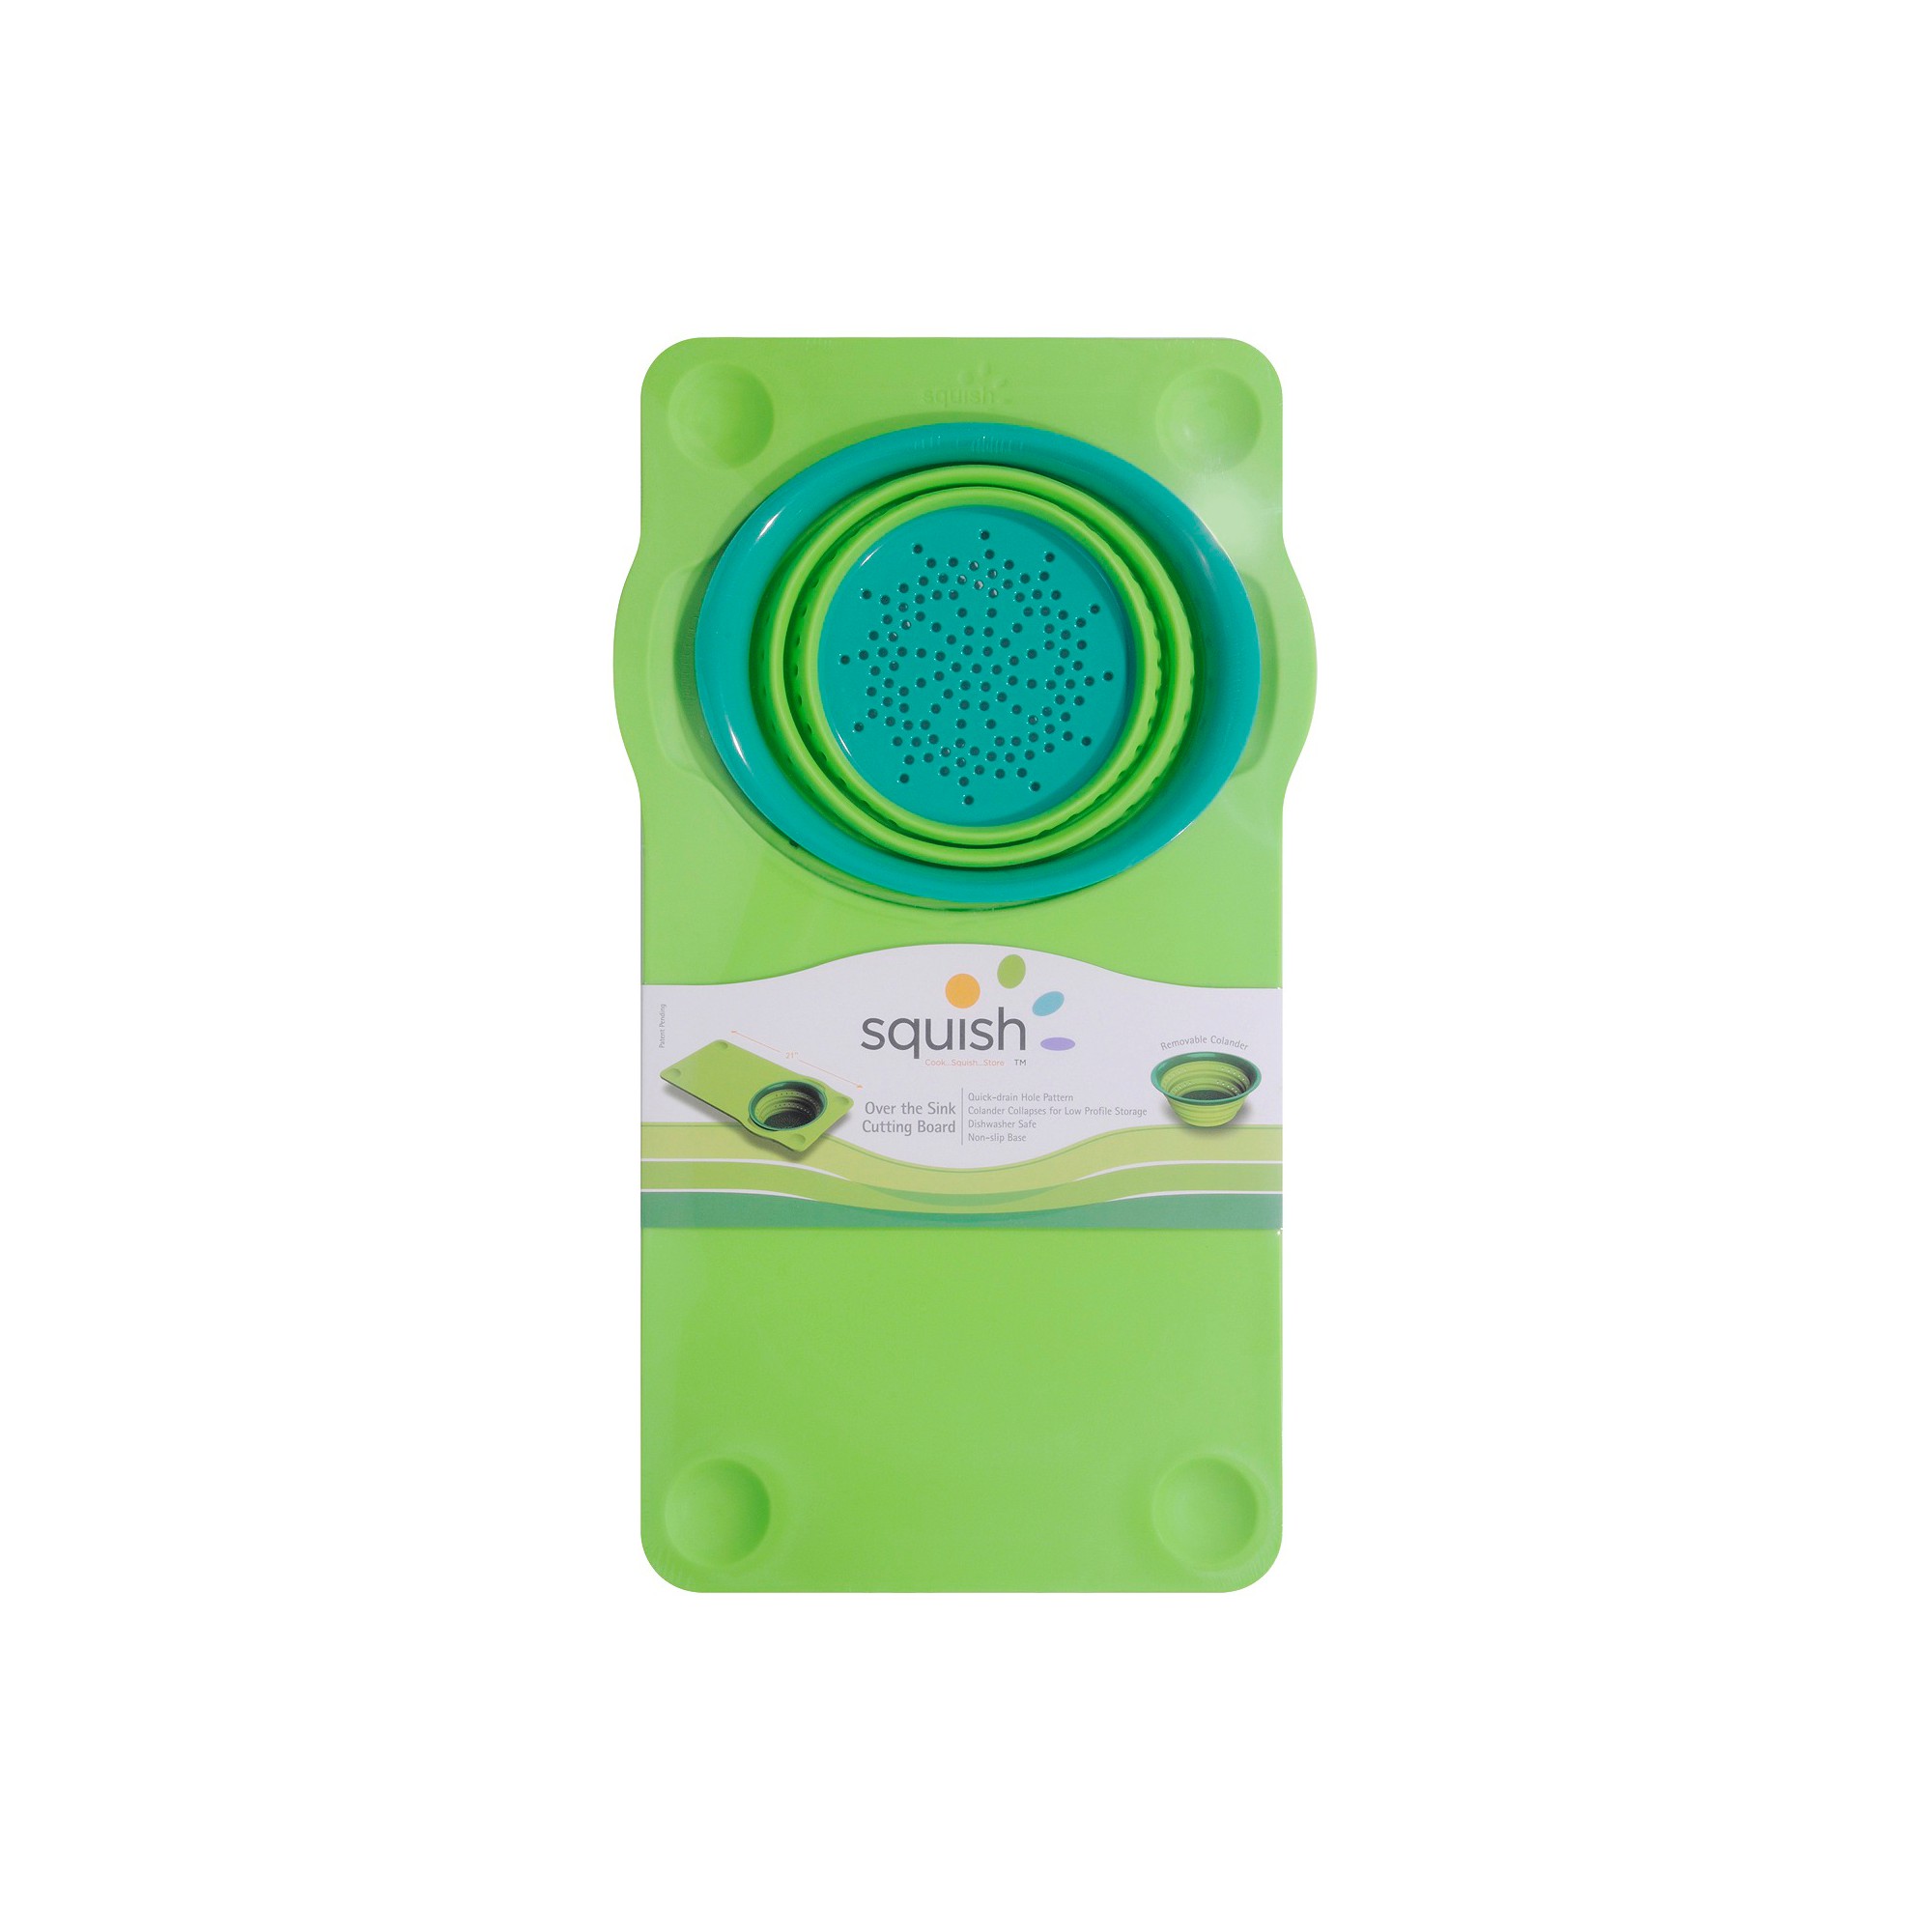 Squish Over-The-Sink Cutting Board with Colander, Green